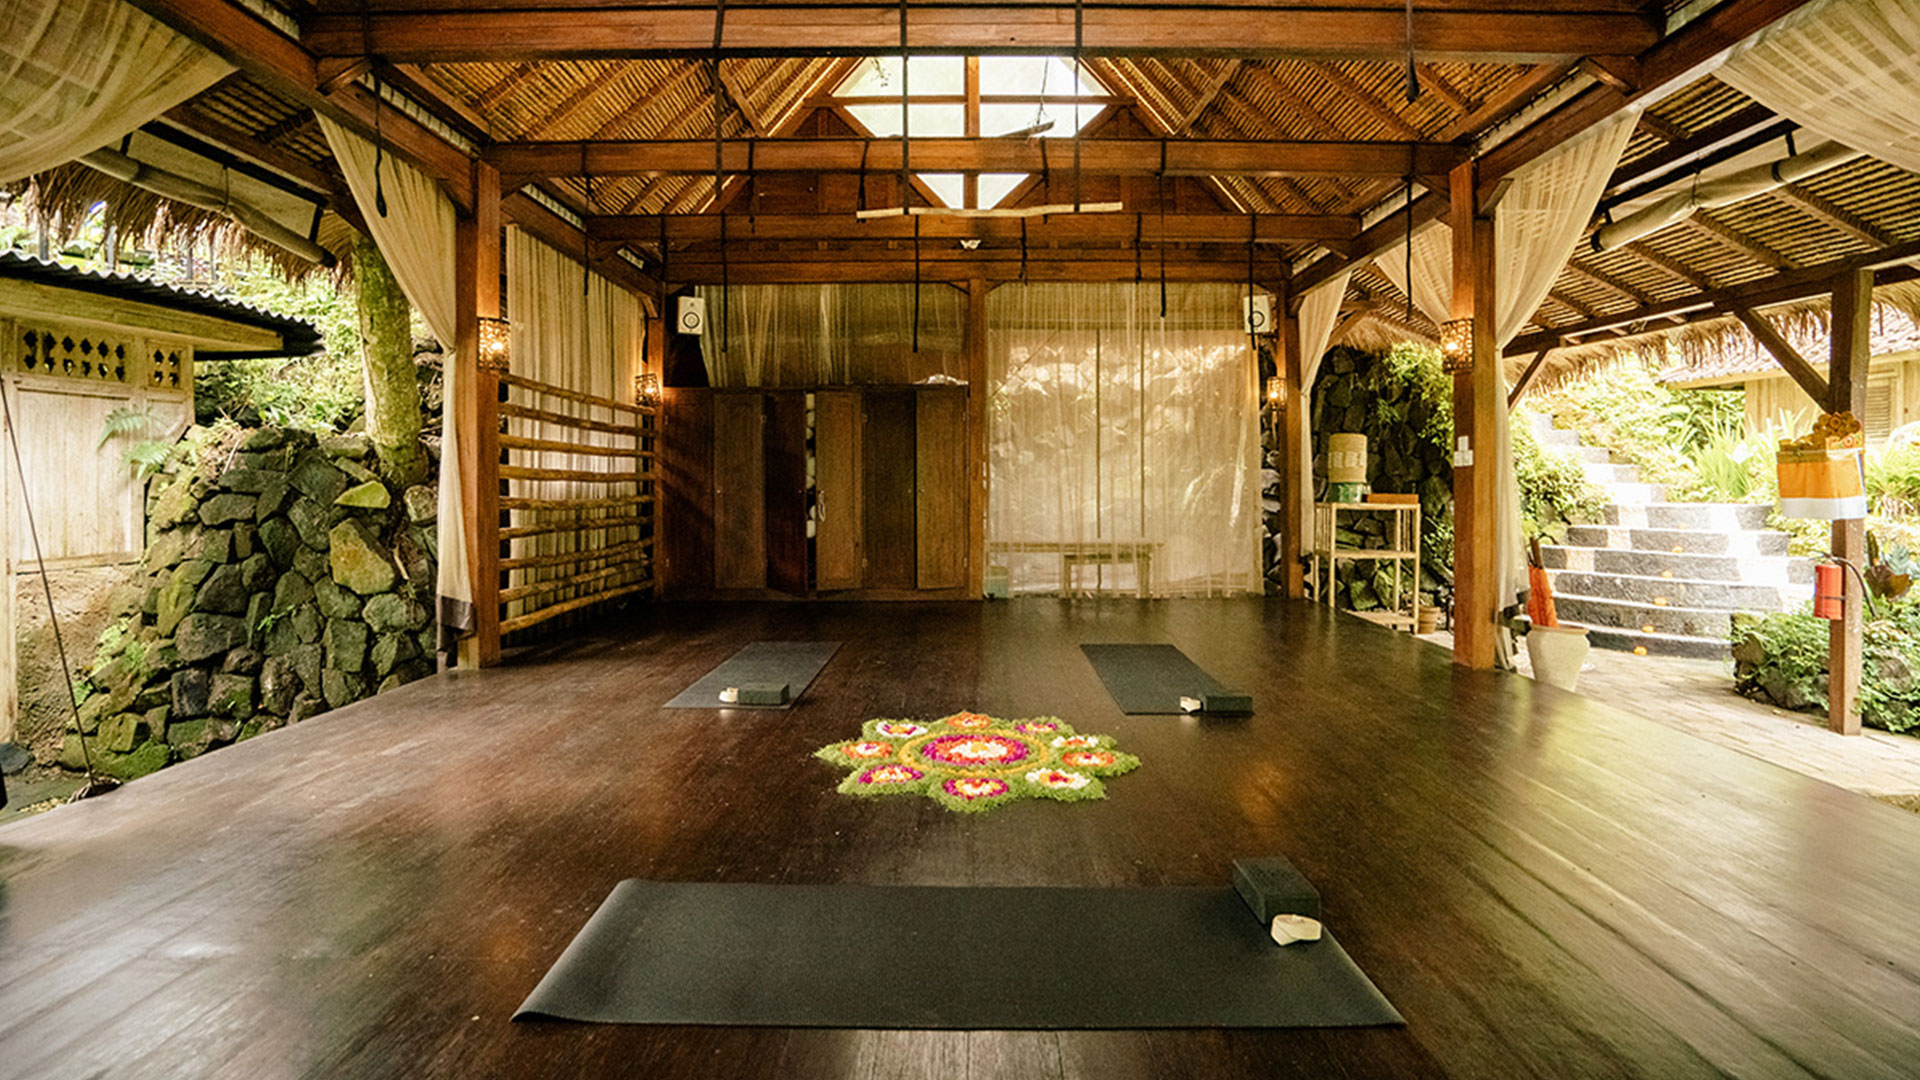 By practicing twice daily yoga and meditation receiving two complementary blissful massages, lounging by private pools, and luxuriating in stunning accommodation surrounded by jungle and rice paddies, you'll surrender into a state of total bliss.